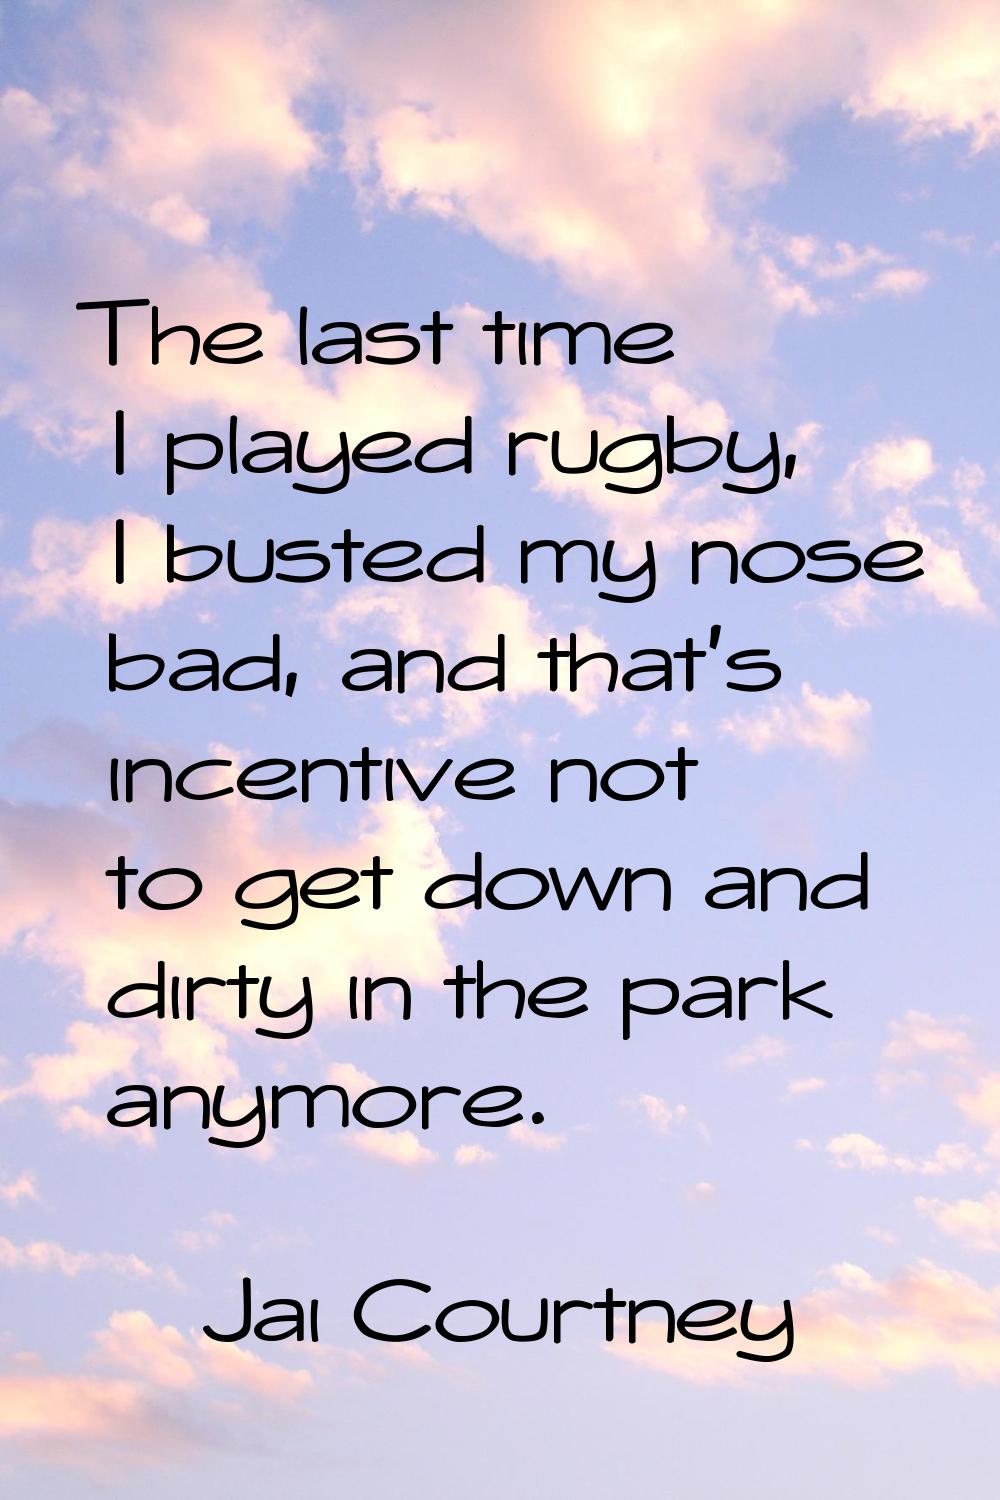 The last time I played rugby, I busted my nose bad, and that's incentive not to get down and dirty 